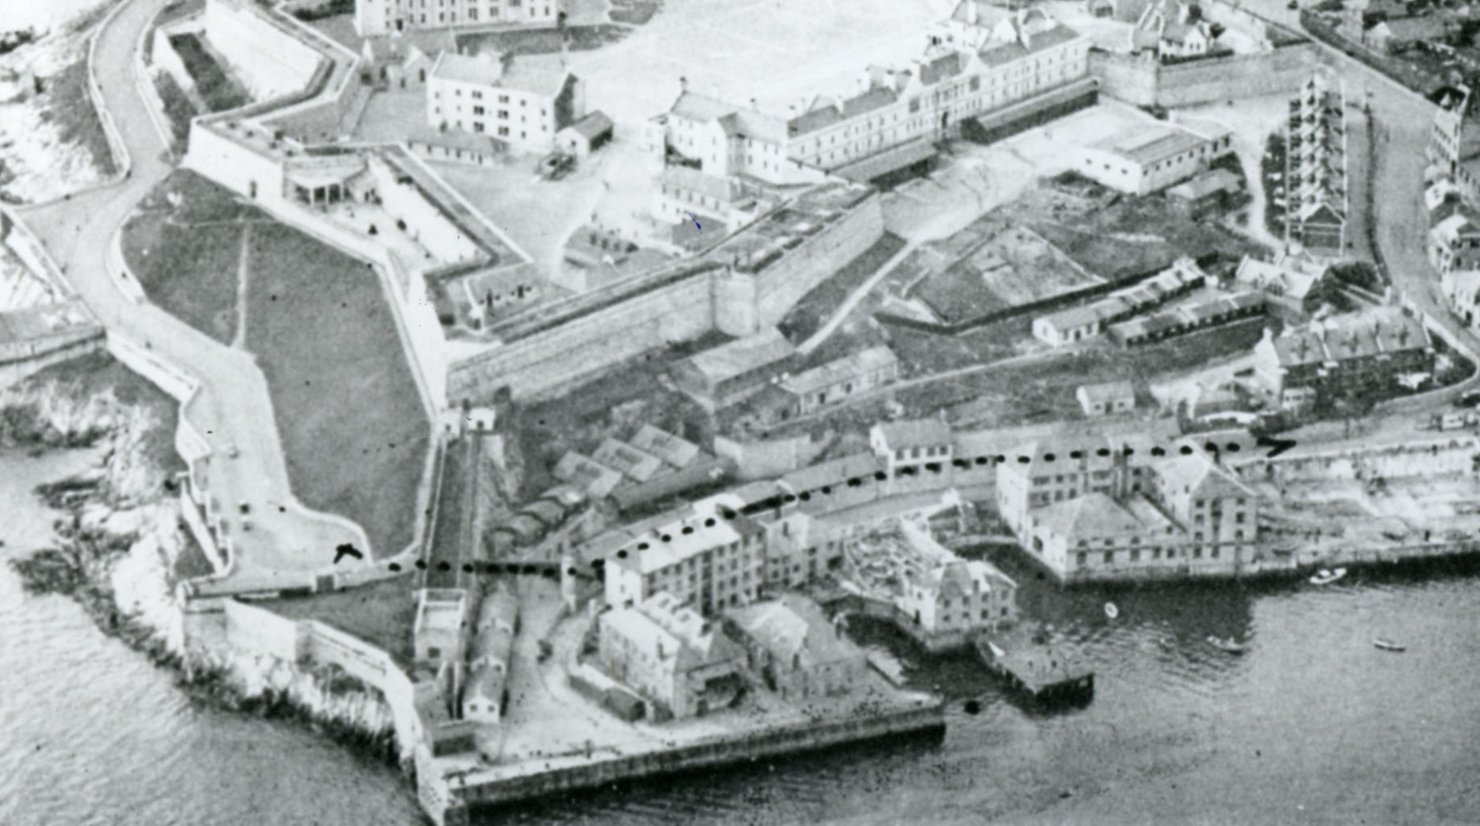 Aerial view of Plymouth's Emigration Depot just before demolition in 1937. Courtesy of Plymouth Libraries.